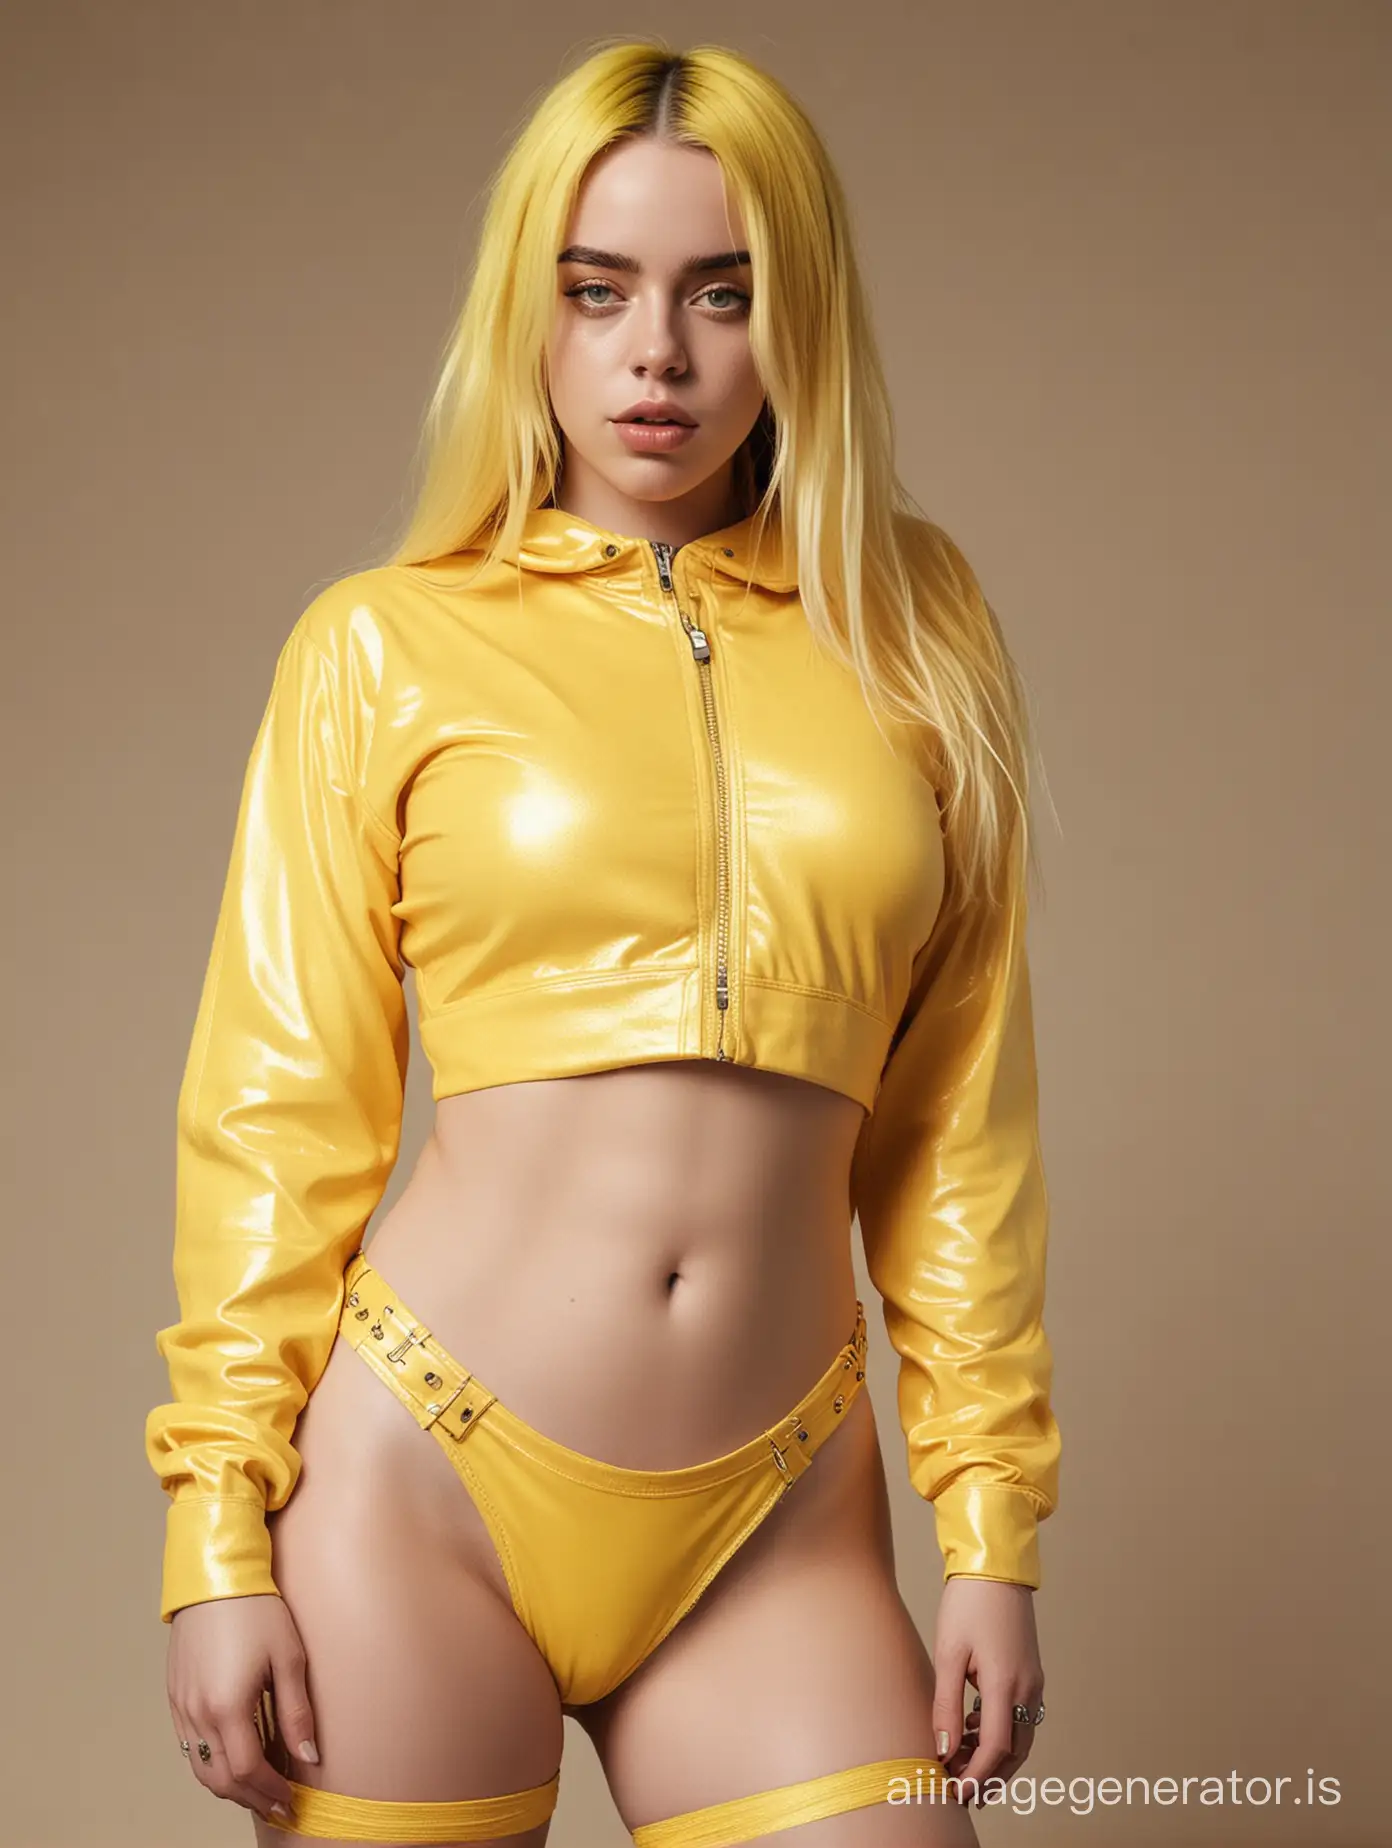 Billie-Eilish-in-Vibrant-Yellow-Outfit-with-Golden-Hair-Realistic-Portrait-Photograph